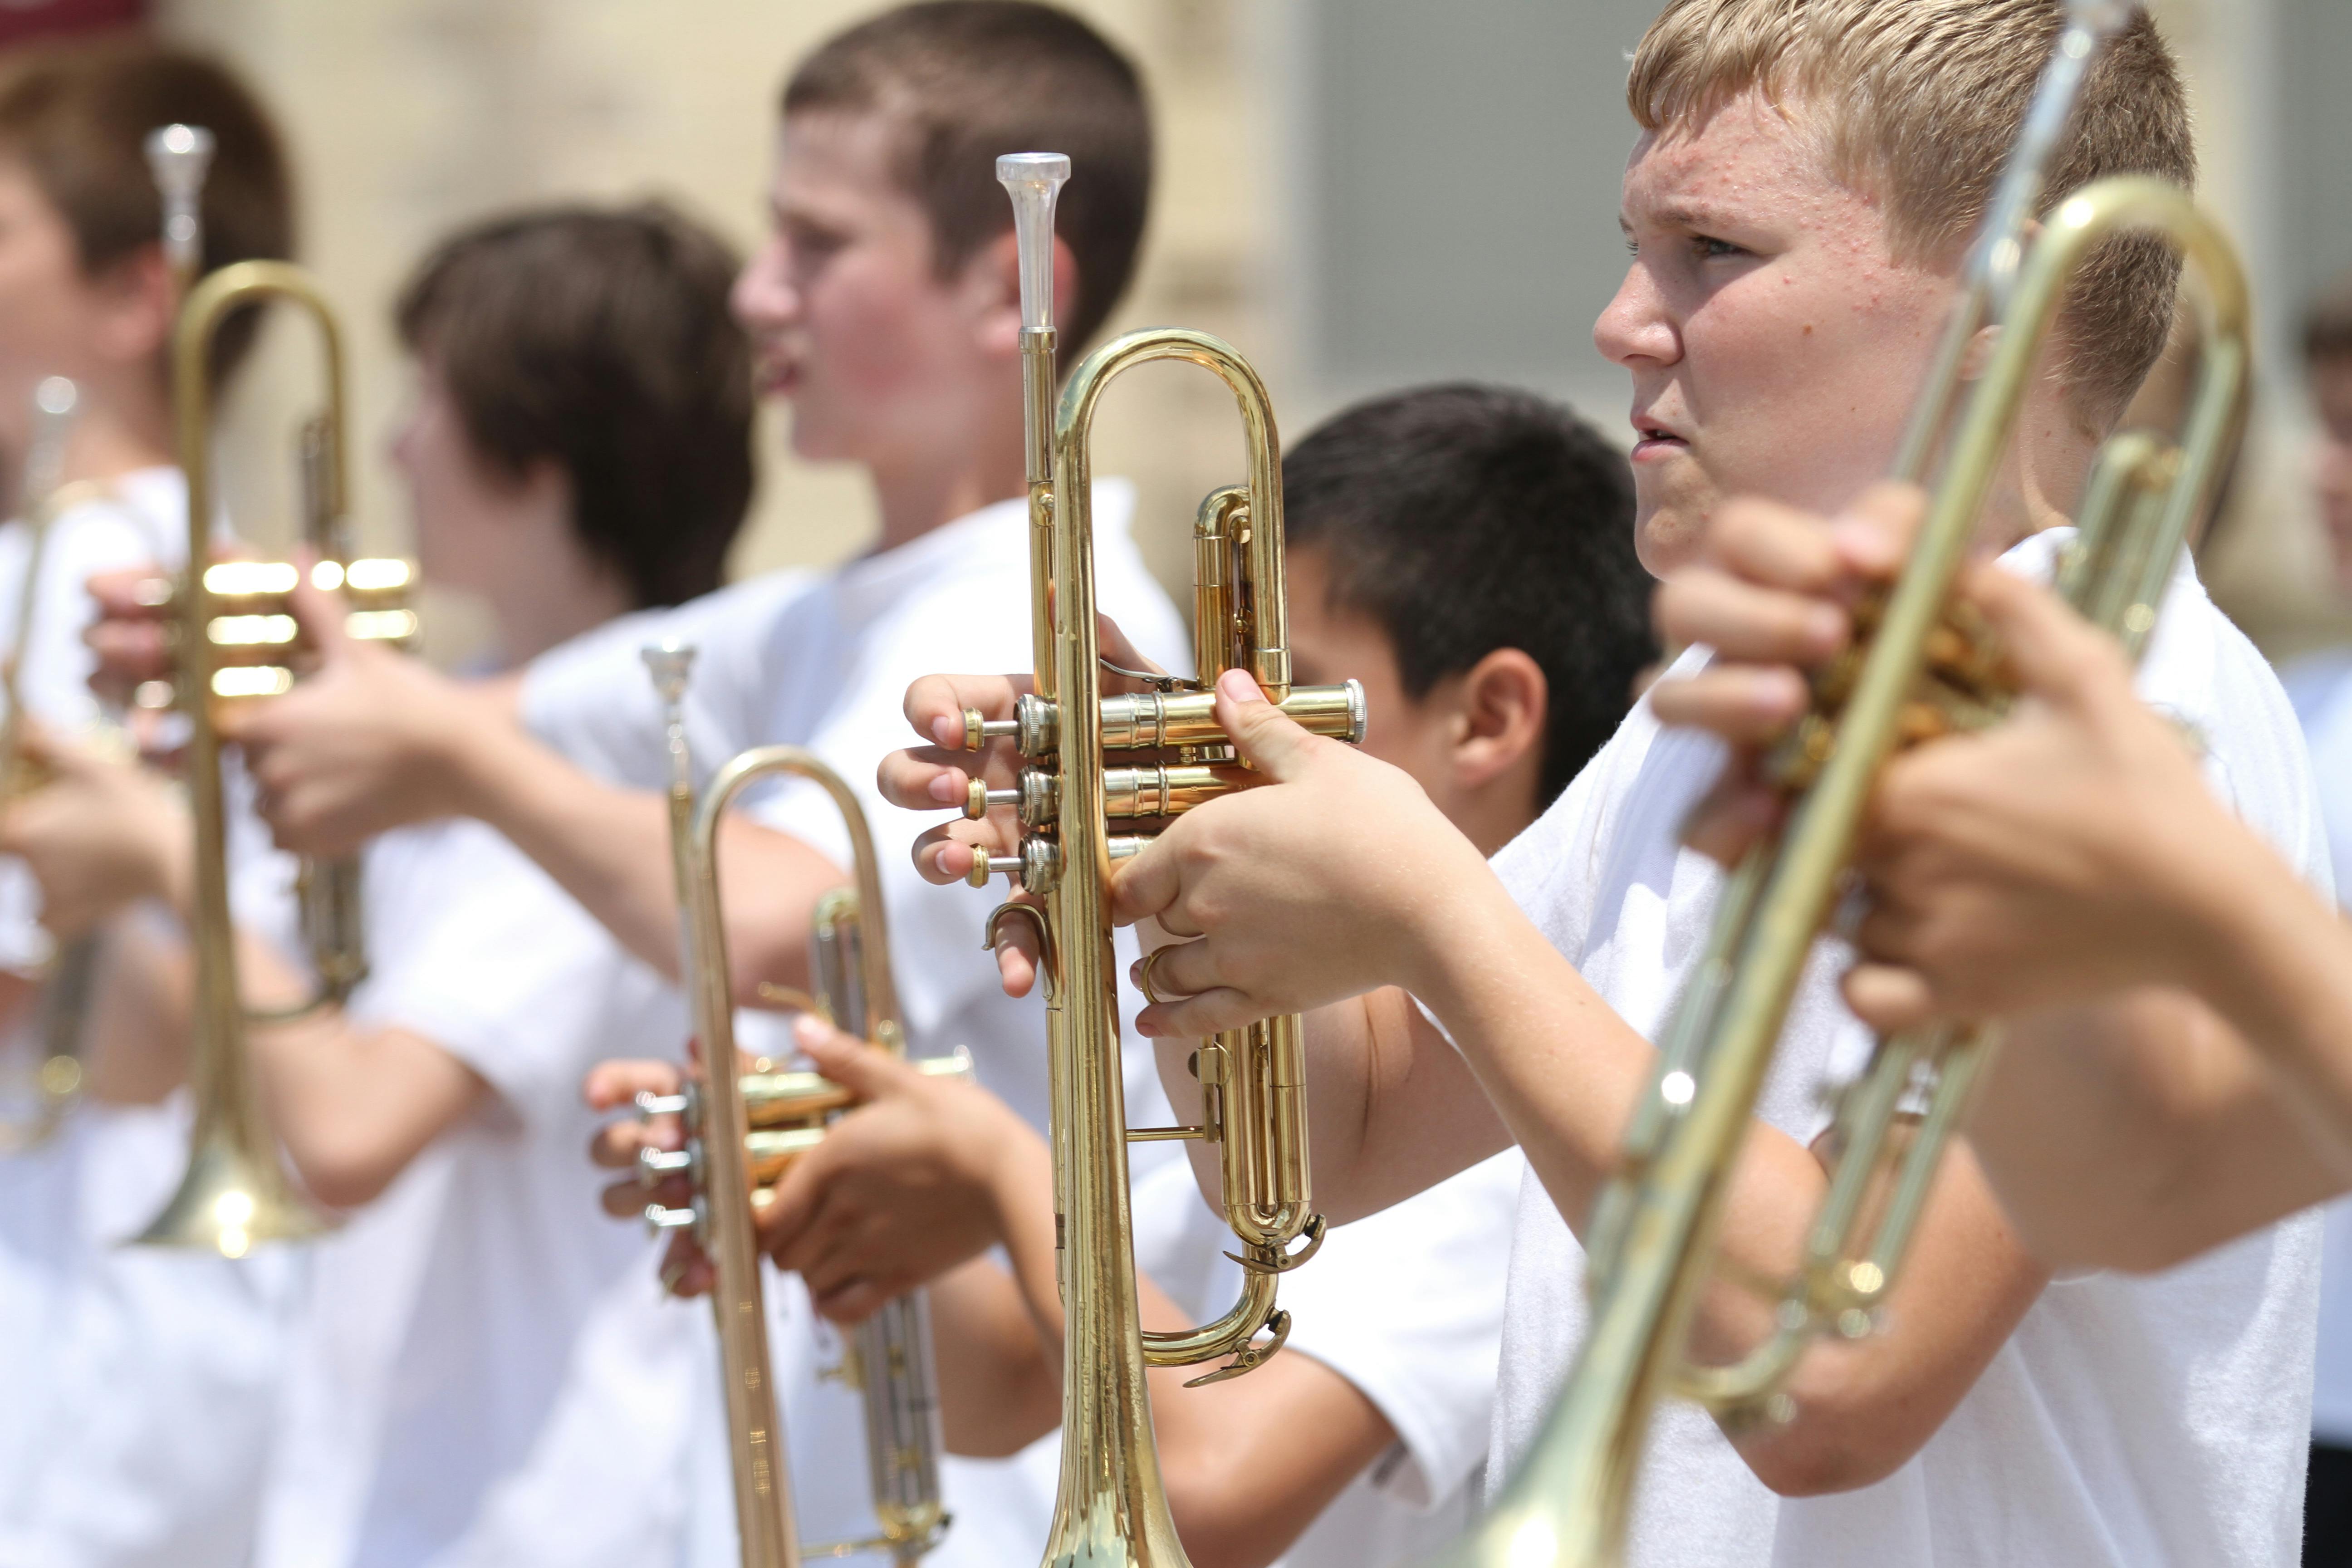 A group of middle school students in white shirts standing in a line and holding trumpets.